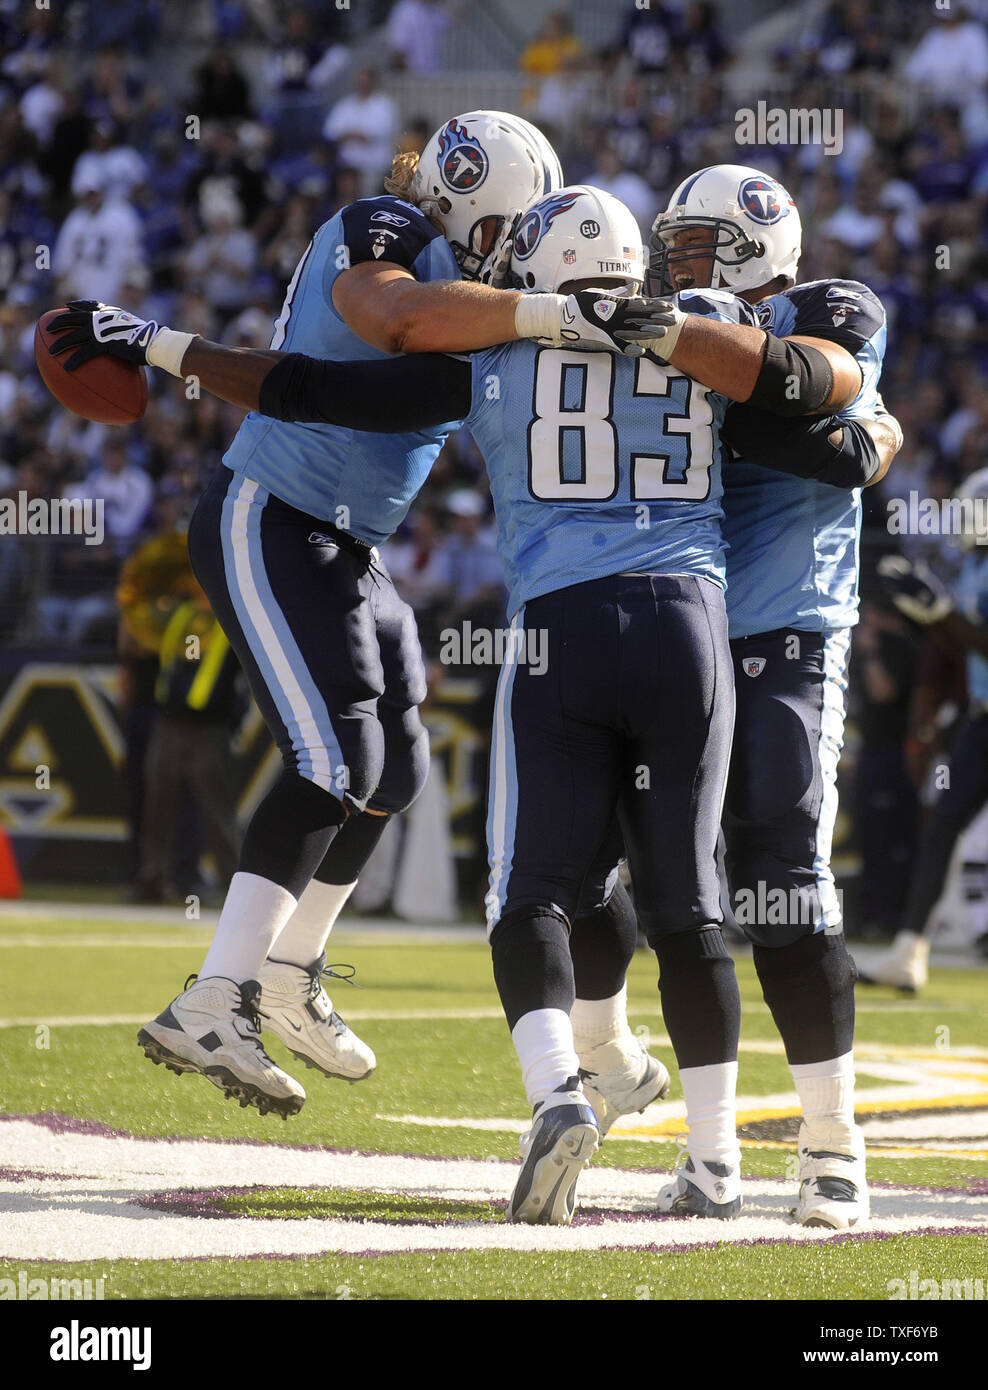 Tennessee Titans tight end Alge Crumpler (83) celebrates with fellow teammates after catching an 11-yard pass for a touchdown against the Baltimore Ravens in the 4th quarter  at M & T Bank Stadium in Baltimore on October 5, 2008. (UPI Photo/Kevin Dietsch) Stock Photo